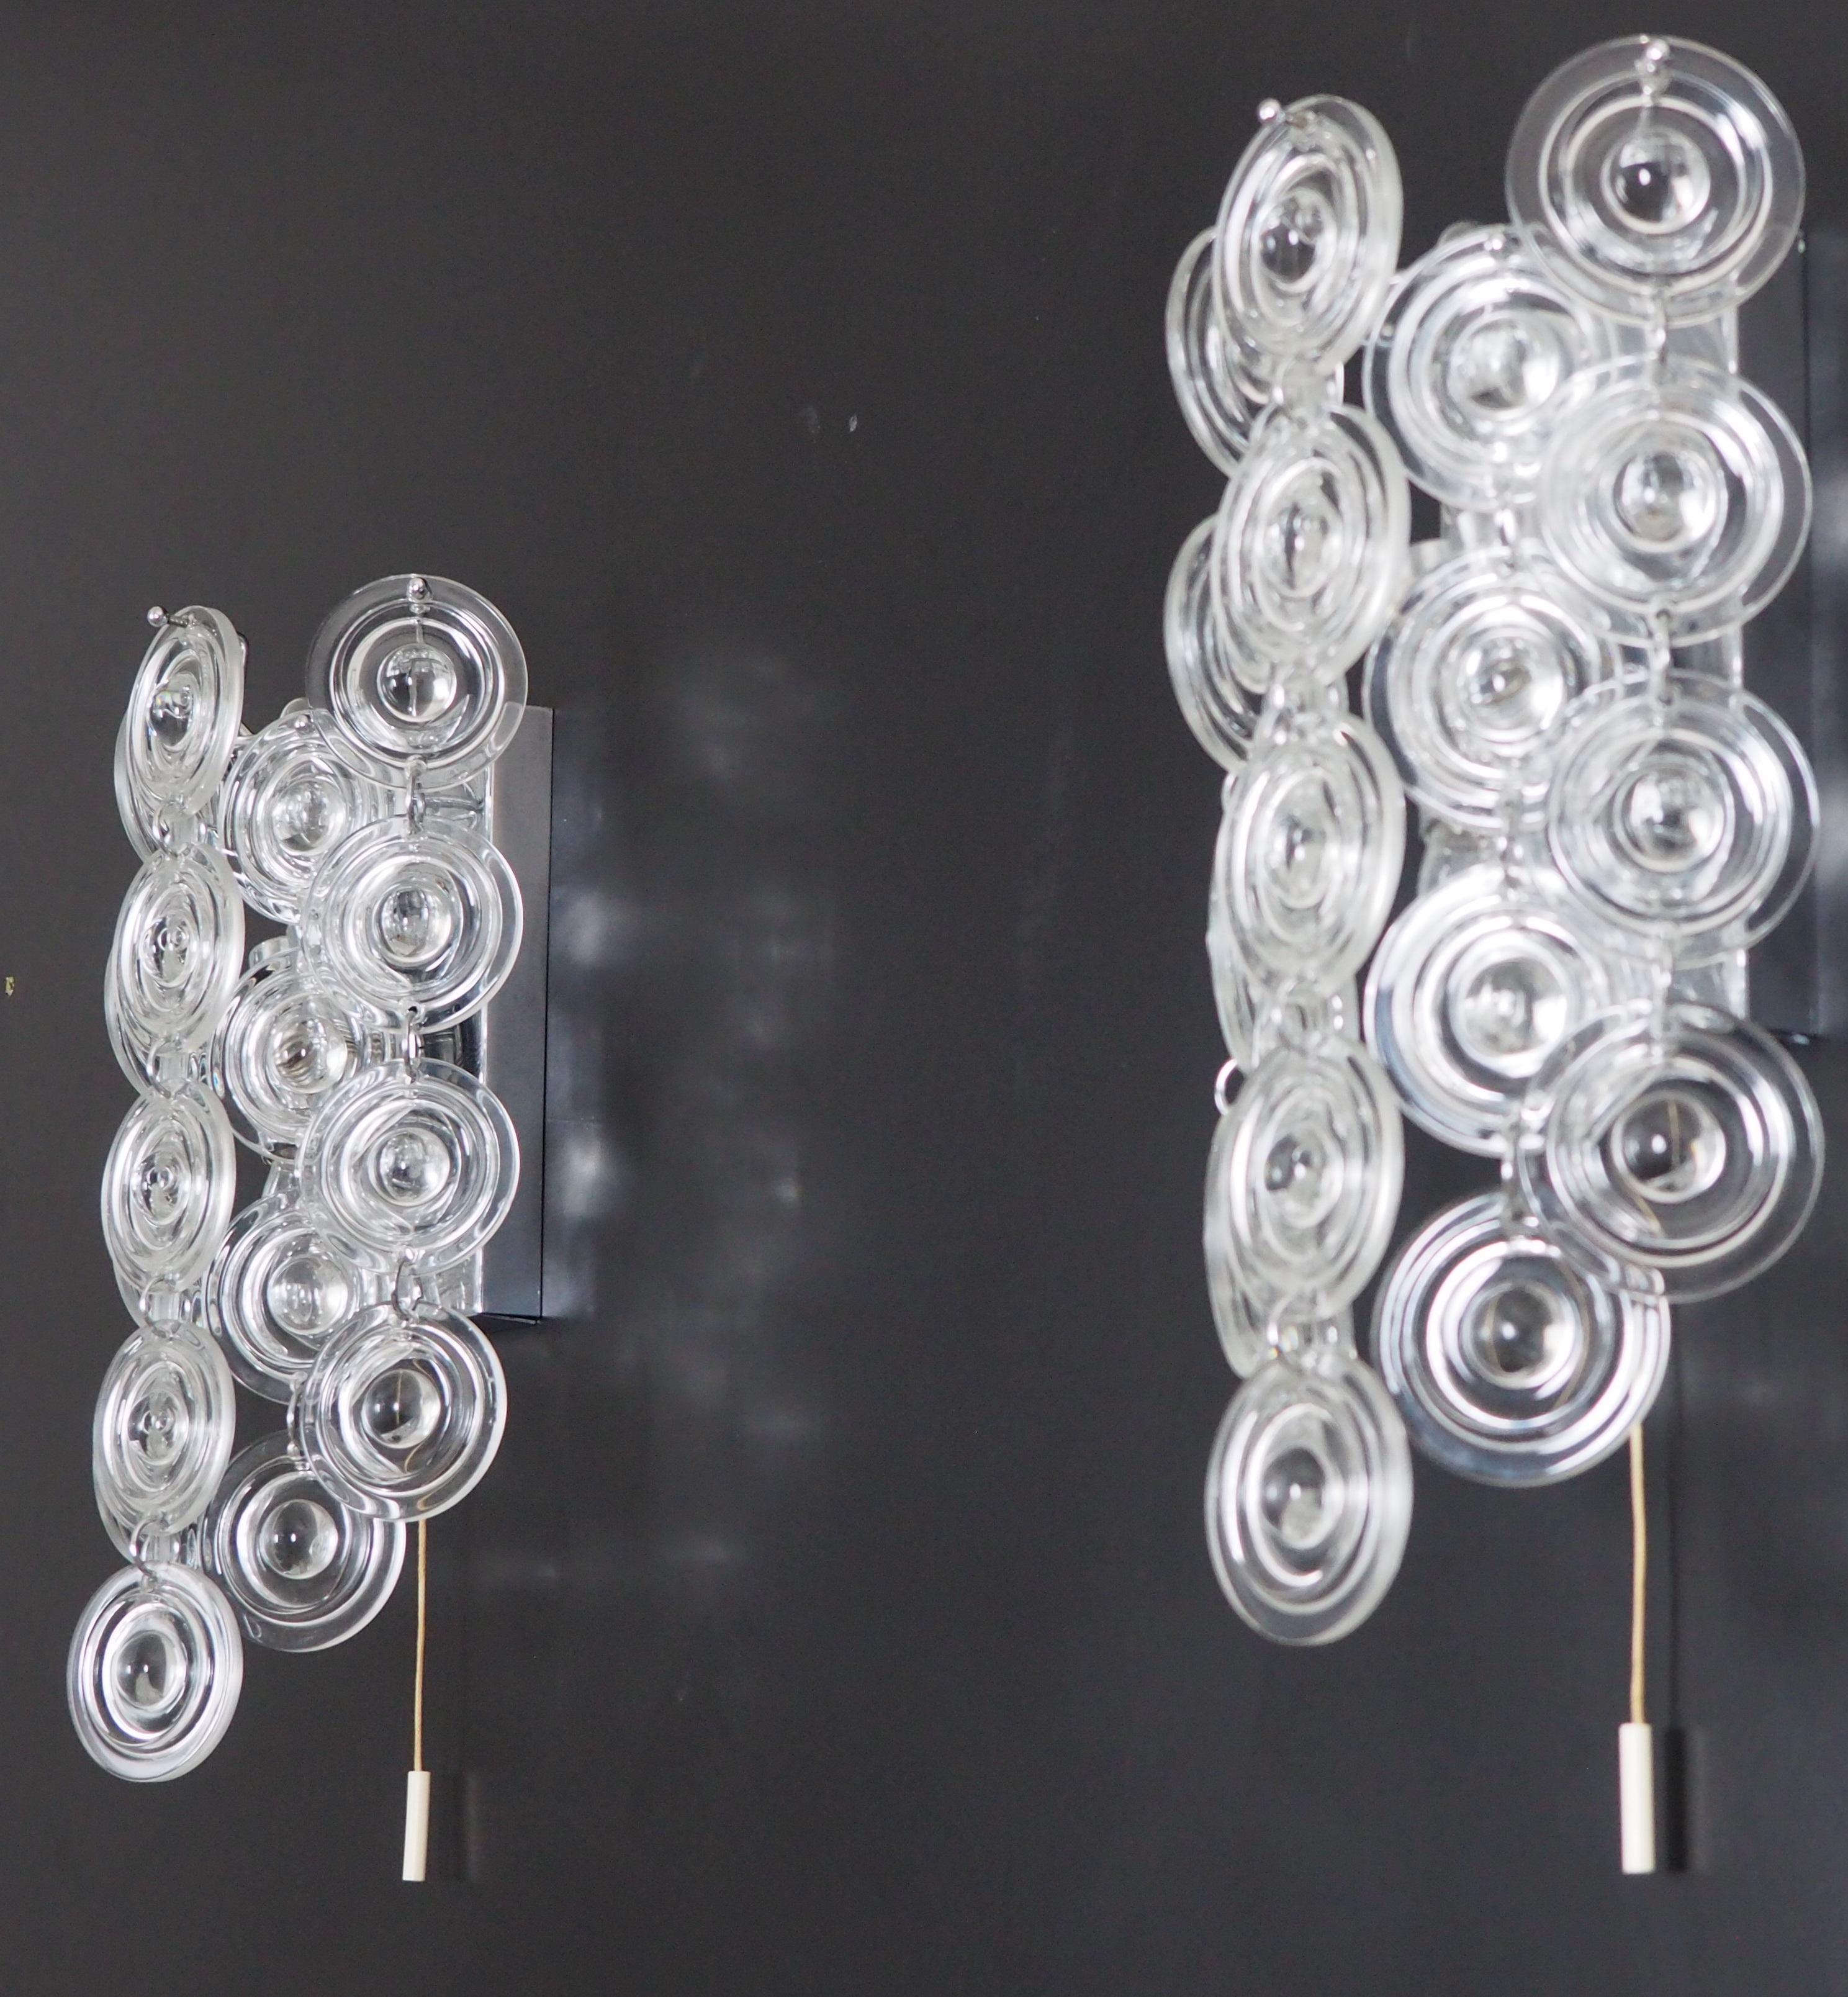 Mid-Century Modern Pair of Rare Glass and Nickel Wall Sconces by Sciolari, Italy, circa 1970s For Sale